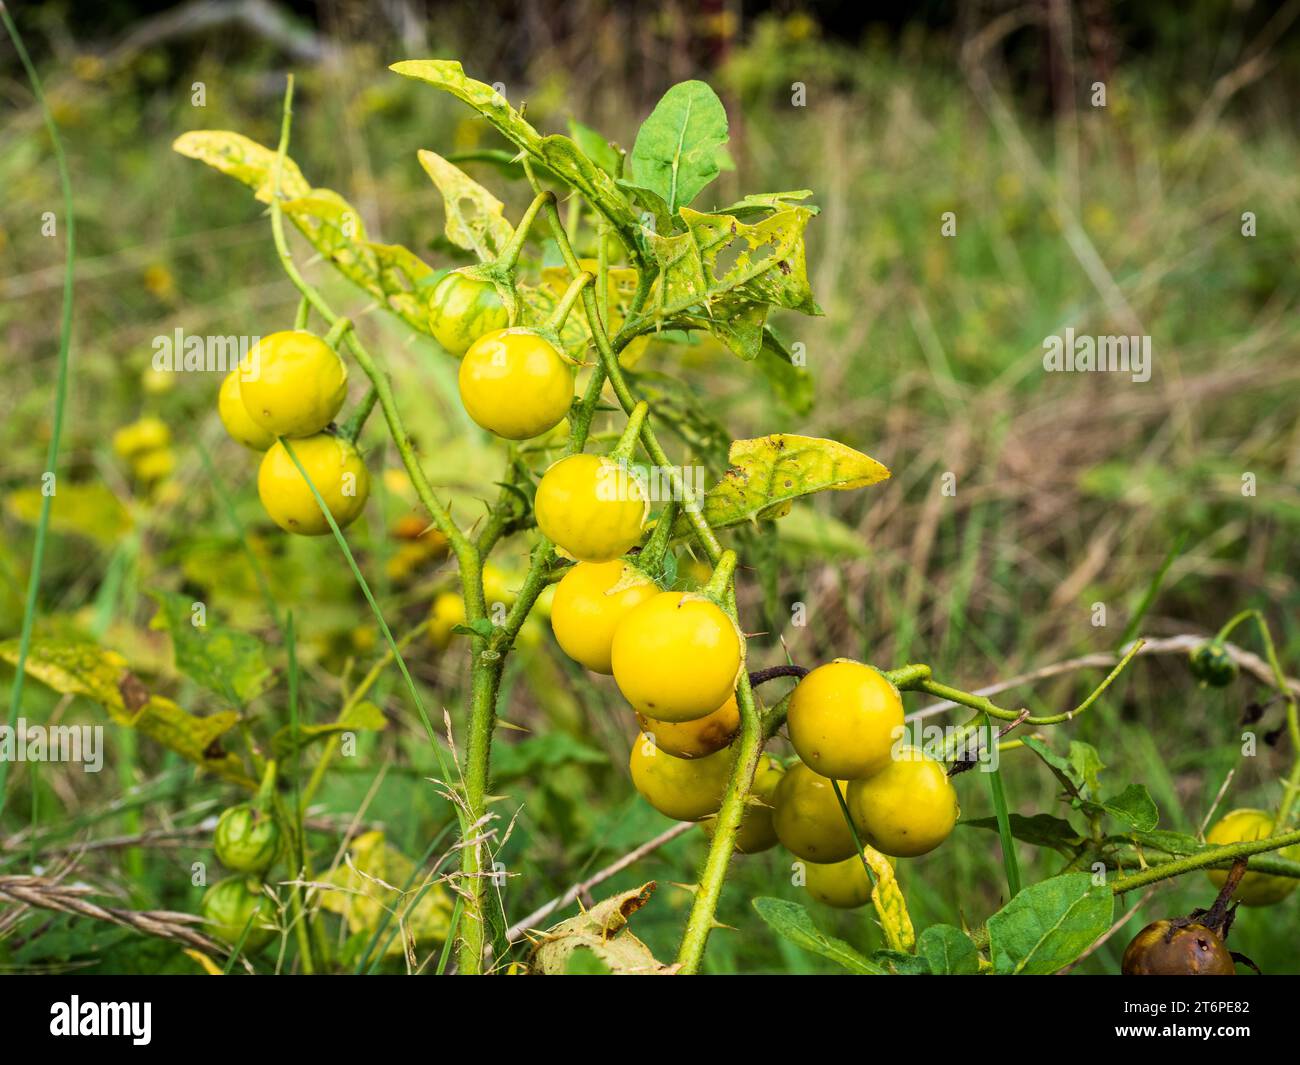 In a detailed close-up, the Carolina horsenettle, scientifically known as Solanum carolinense, showcases its vibrant yellow fruit. This small but eye- Stock Photo